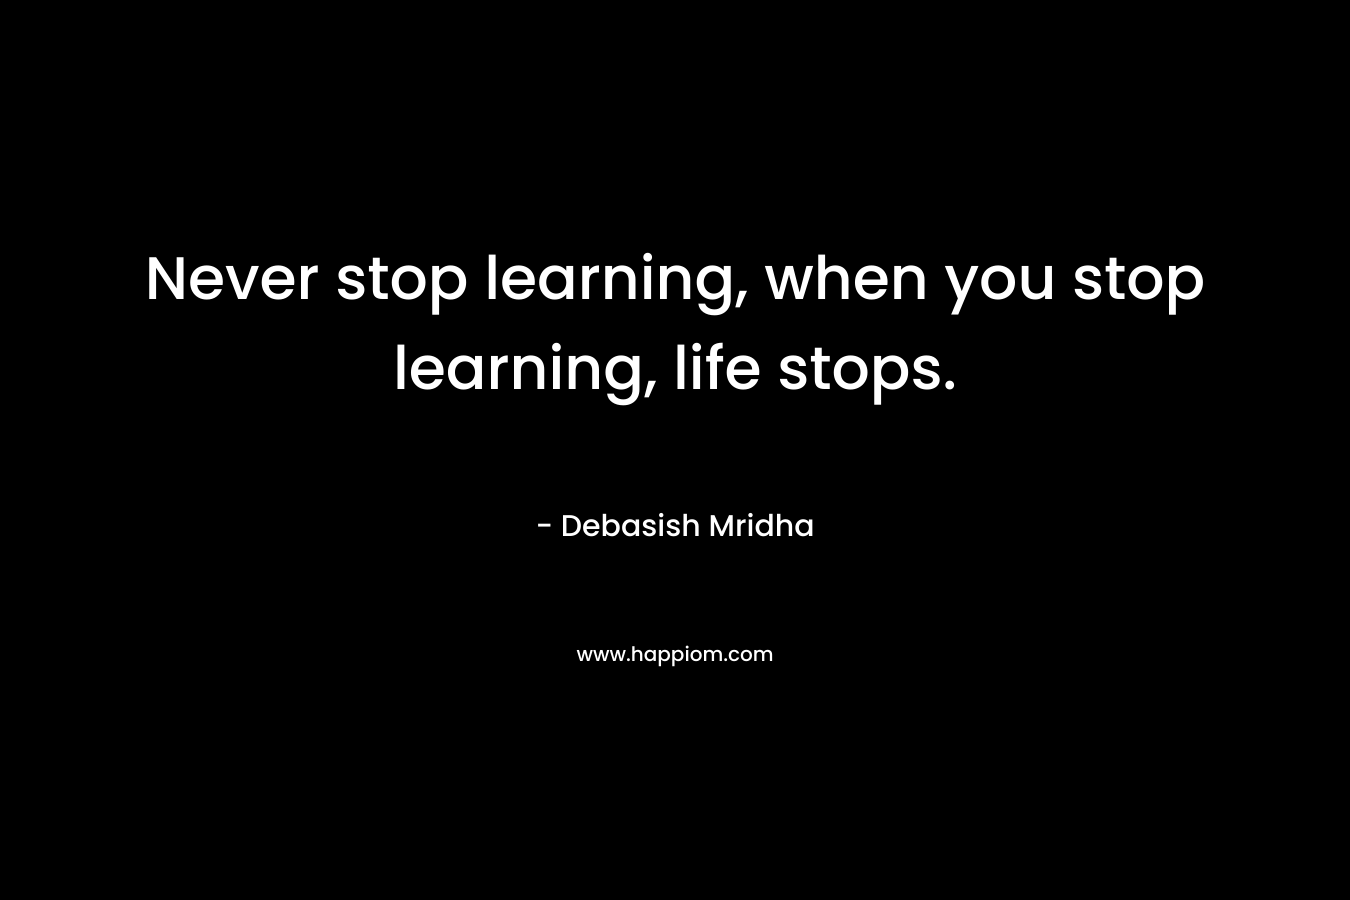 Never stop learning, when you stop learning, life stops.